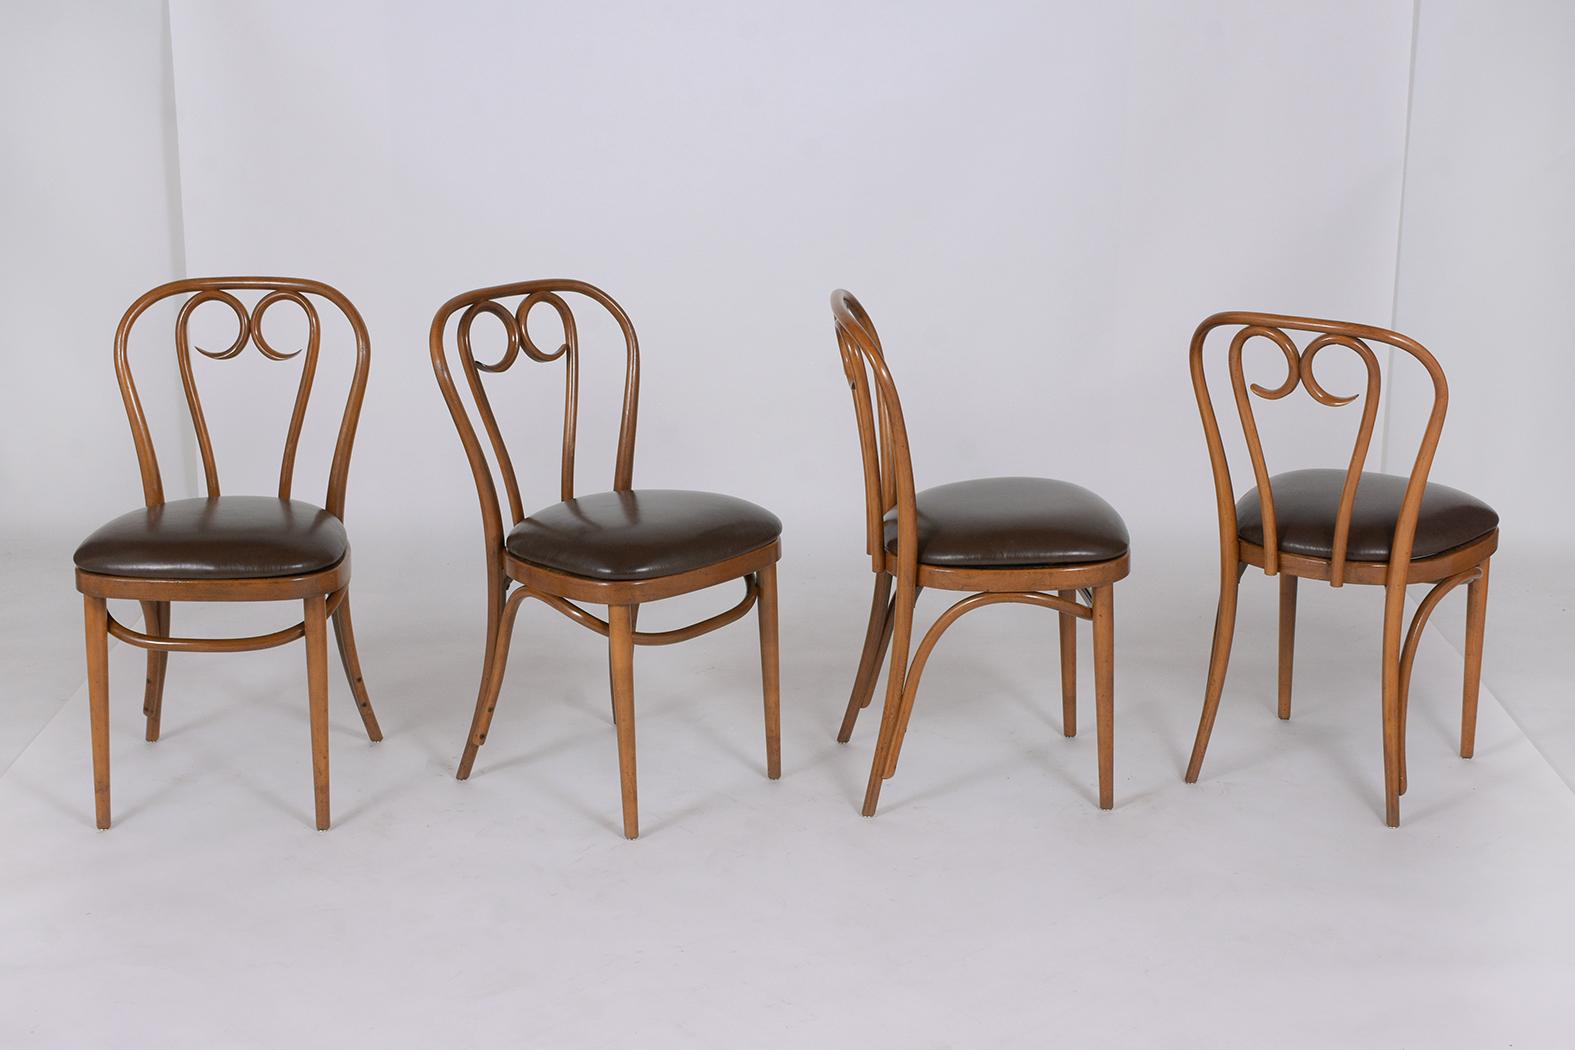 American Art-Deco Thonet Bentwood Leather Dining Chairs with Walnut Finish - Set of Six For Sale